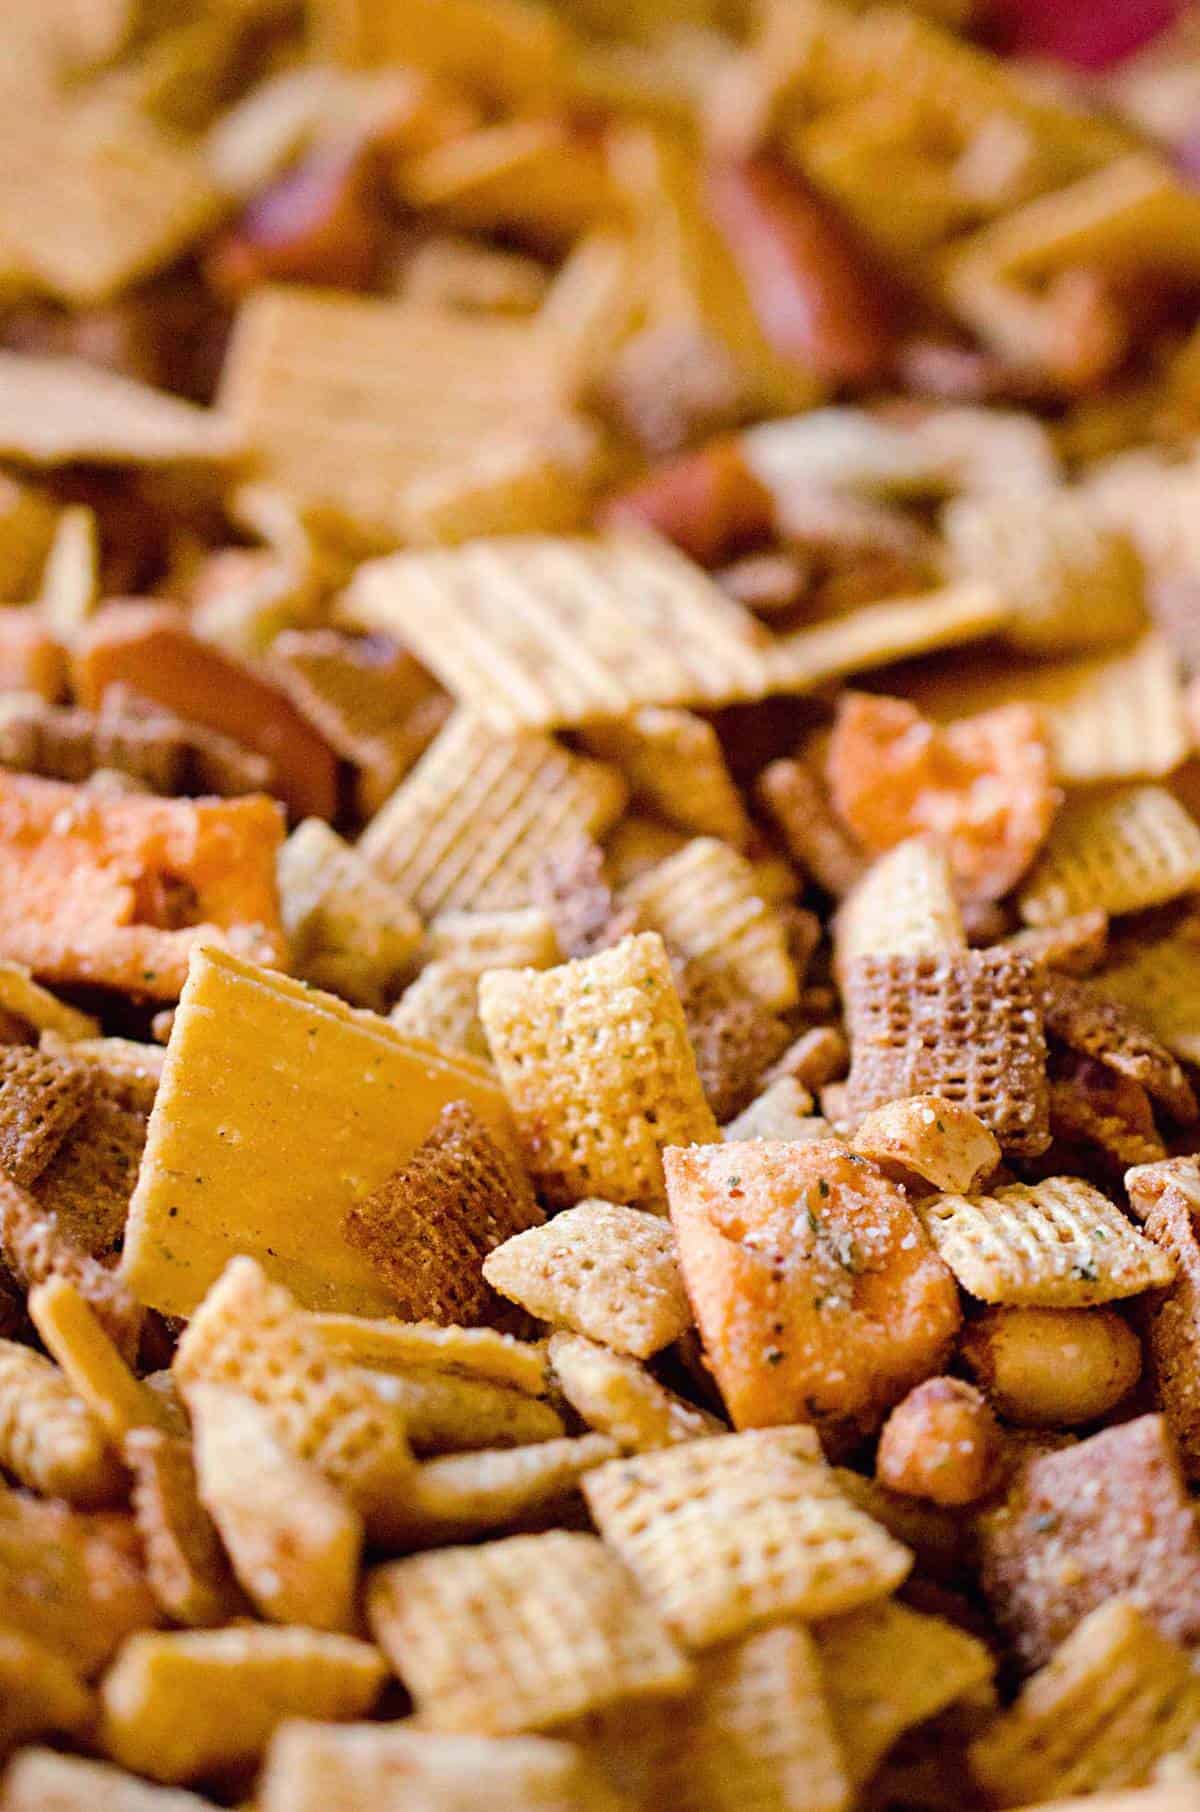 Zesty 3 Cheese Snack Mix is the perfect treat for the holidays with Chex Mix, nuts, cheesy crackers and pretzels coated in ranch seasoning, Parmesan and butter!